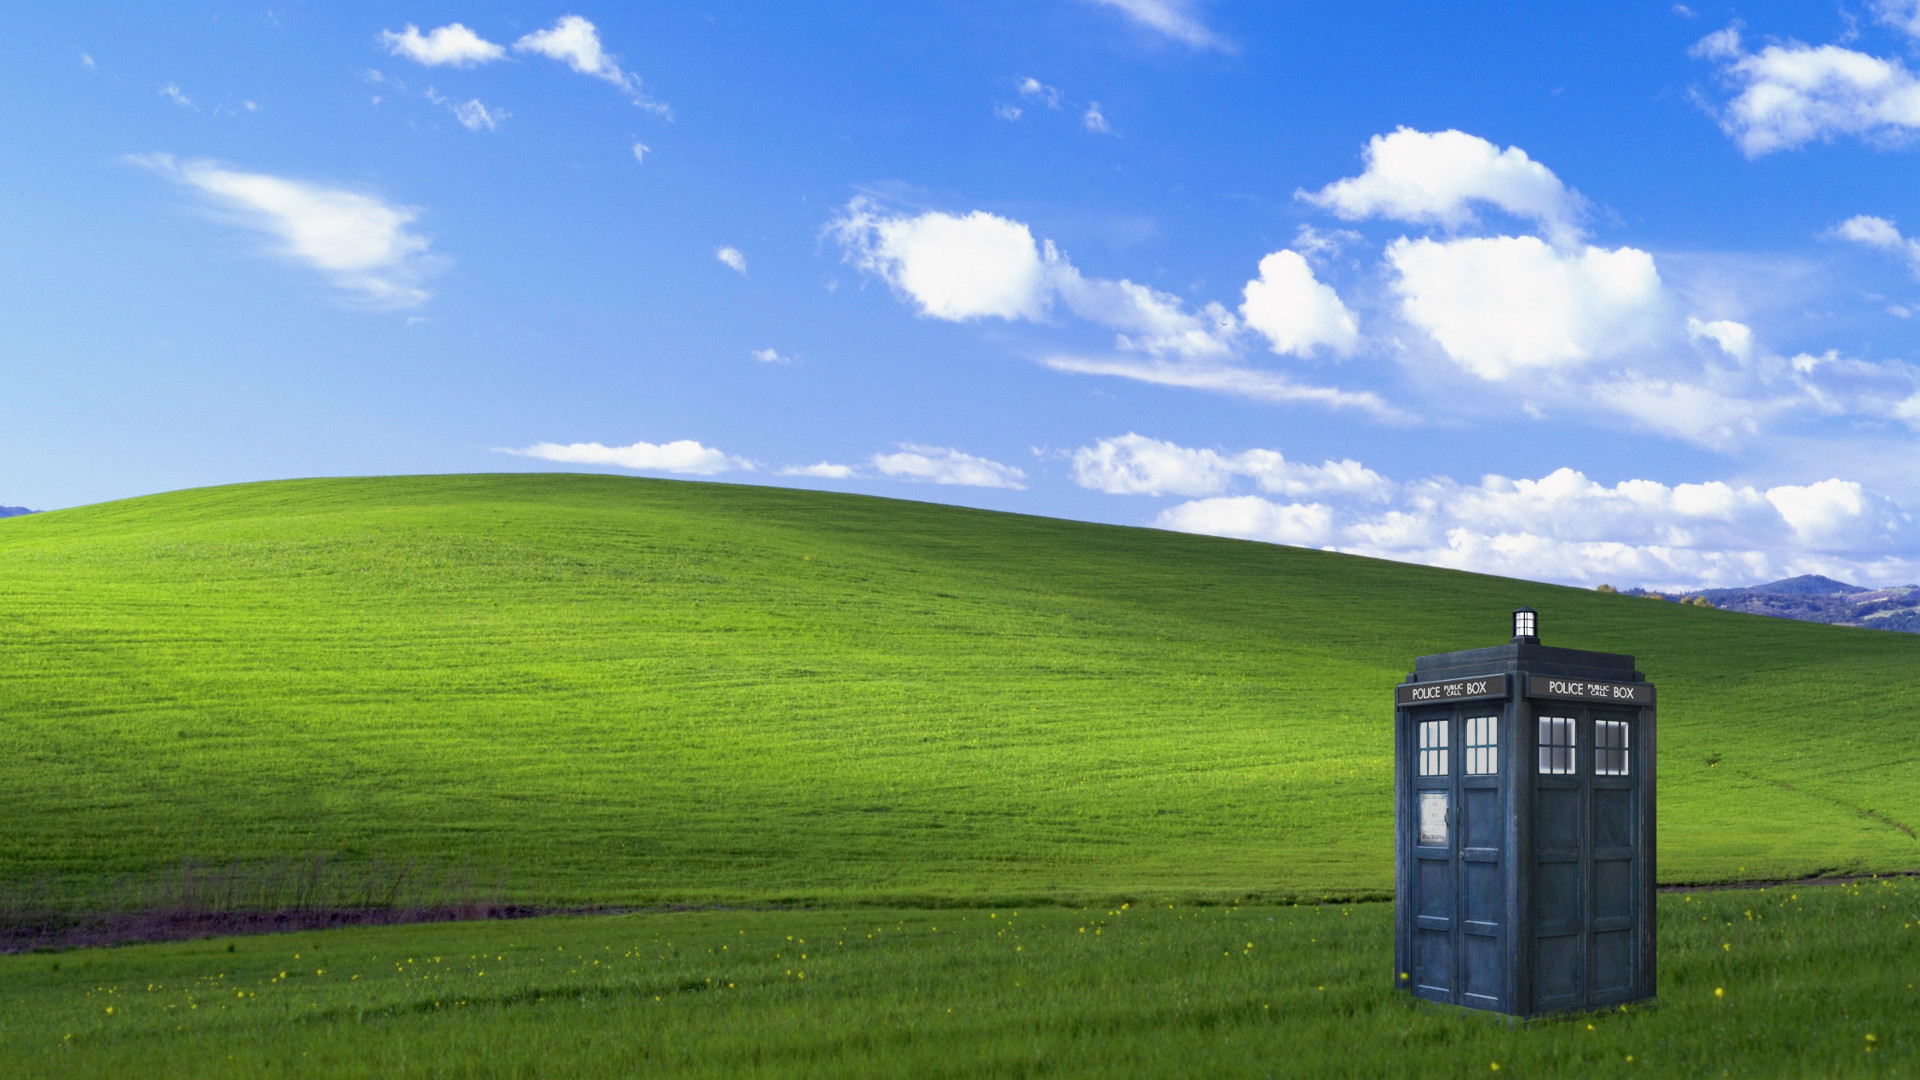 Doctor Who Live Wallpapers - Windows Xp - HD Wallpaper 